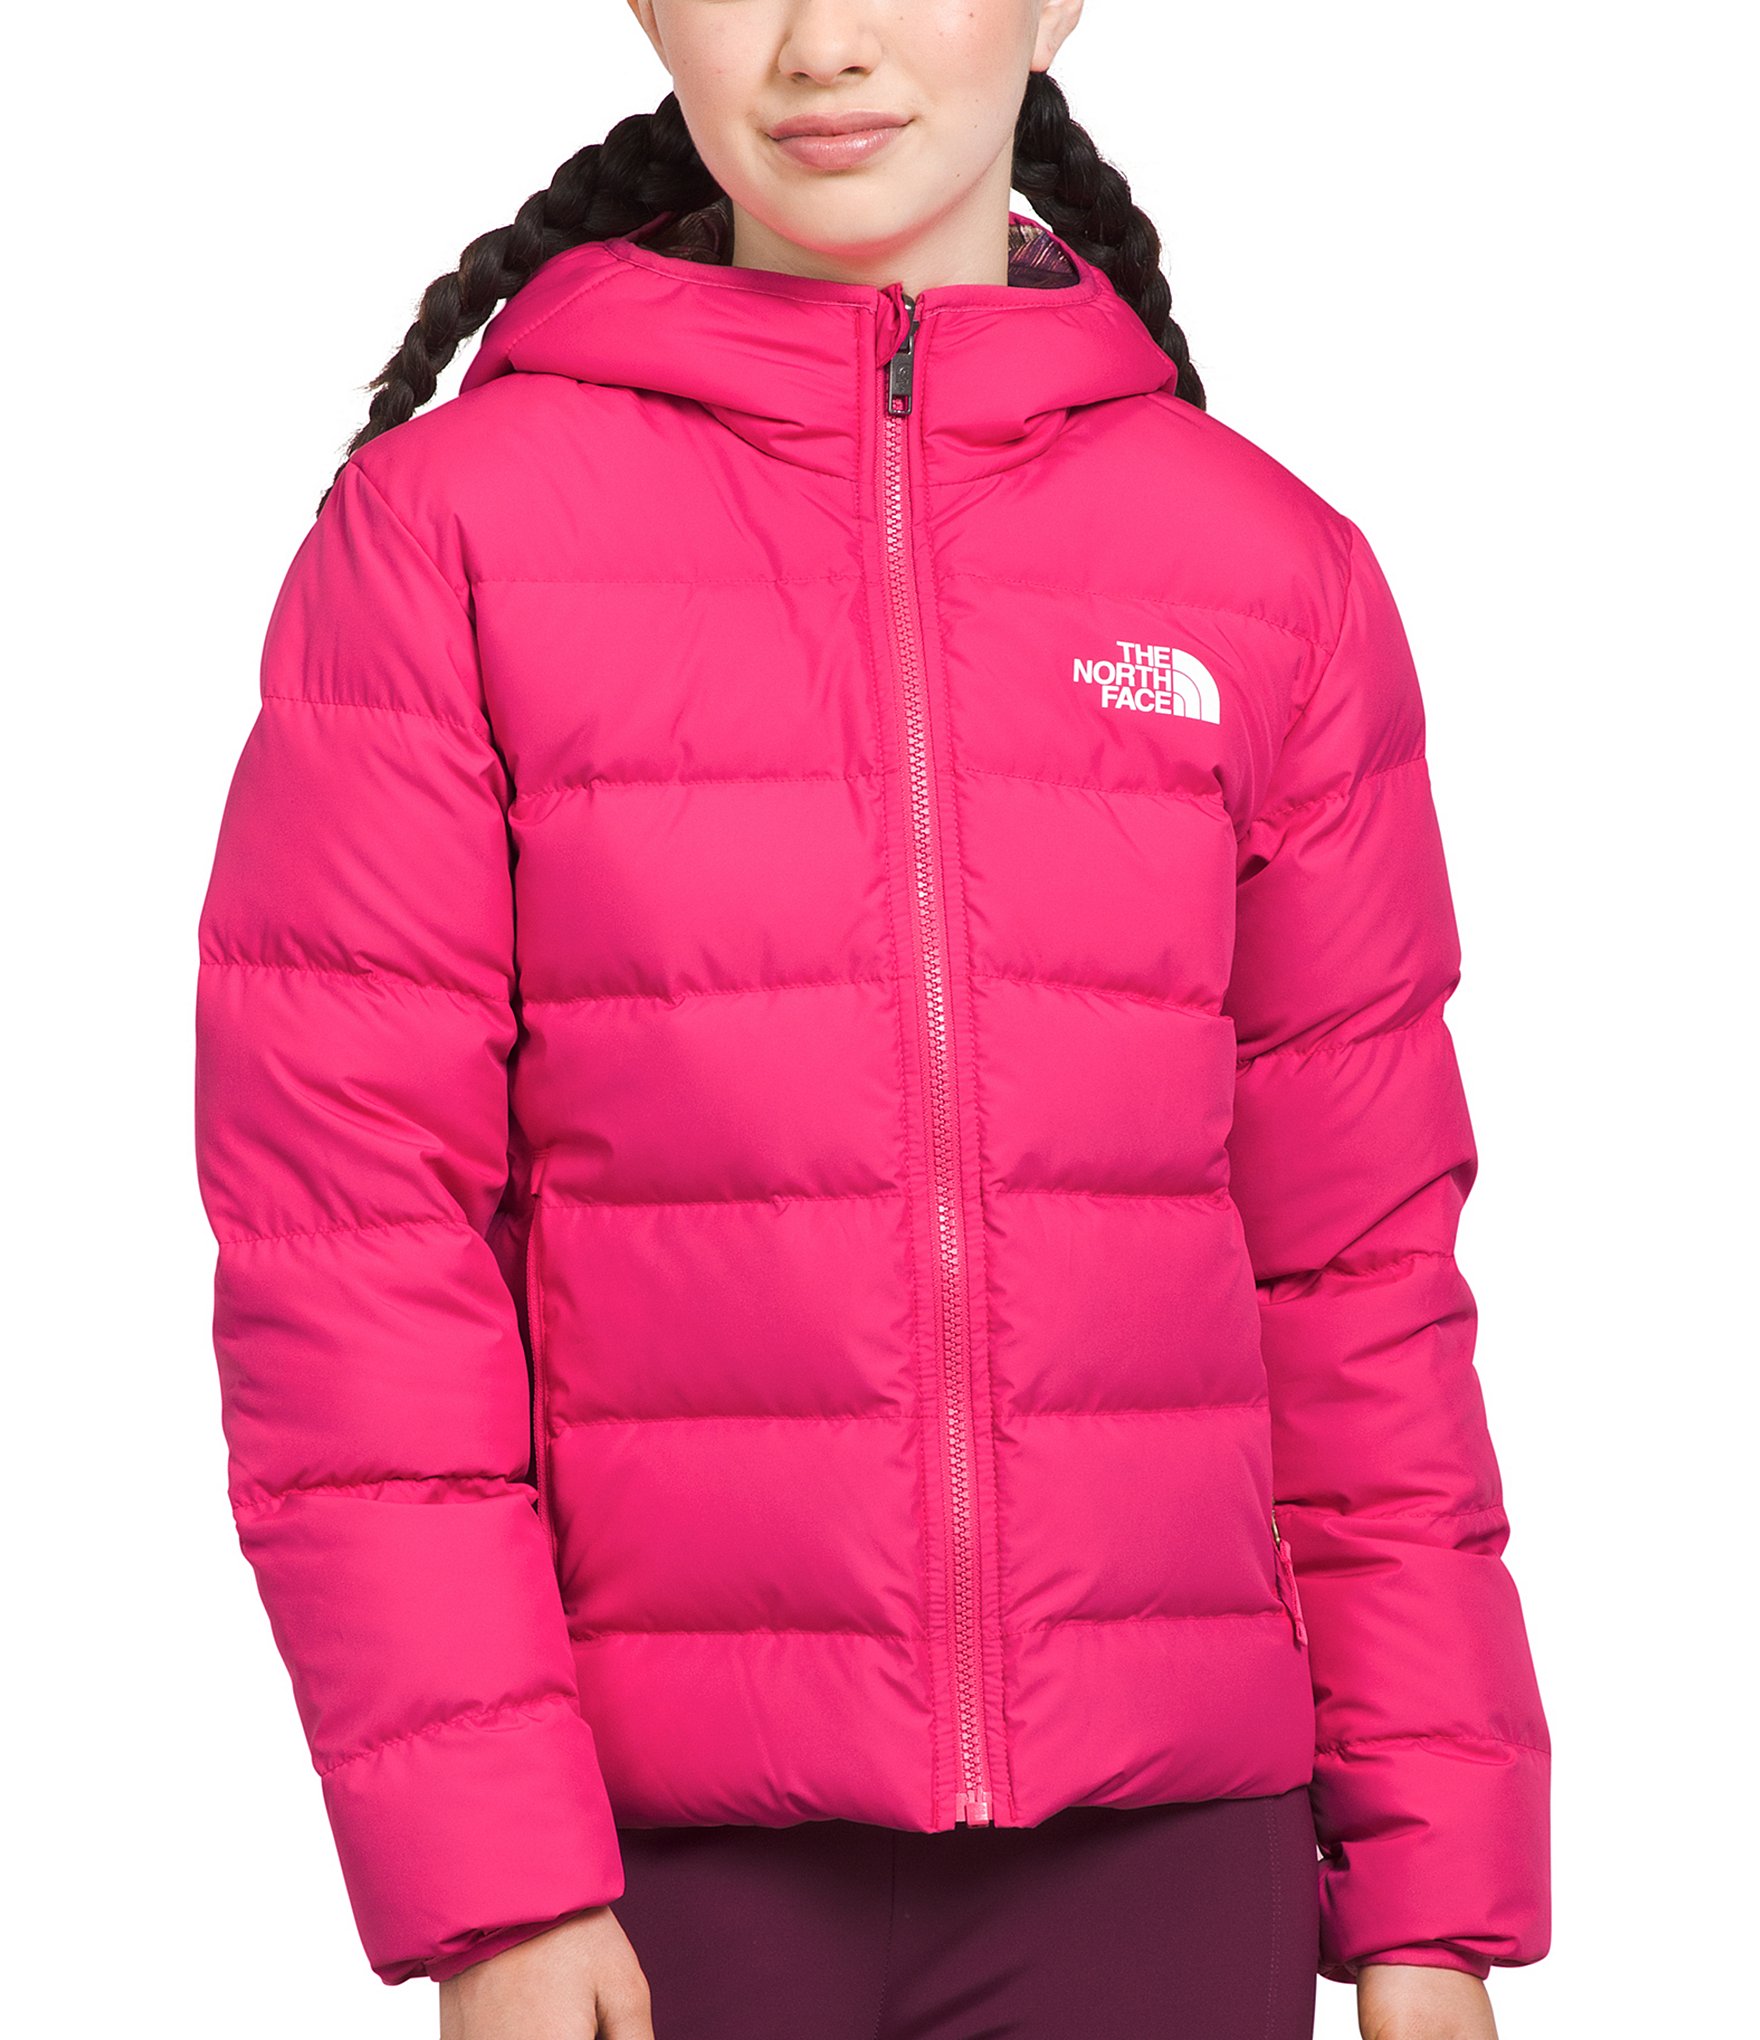 The North Face Little/Big Girls 6-16 Long Sleeve Reversible